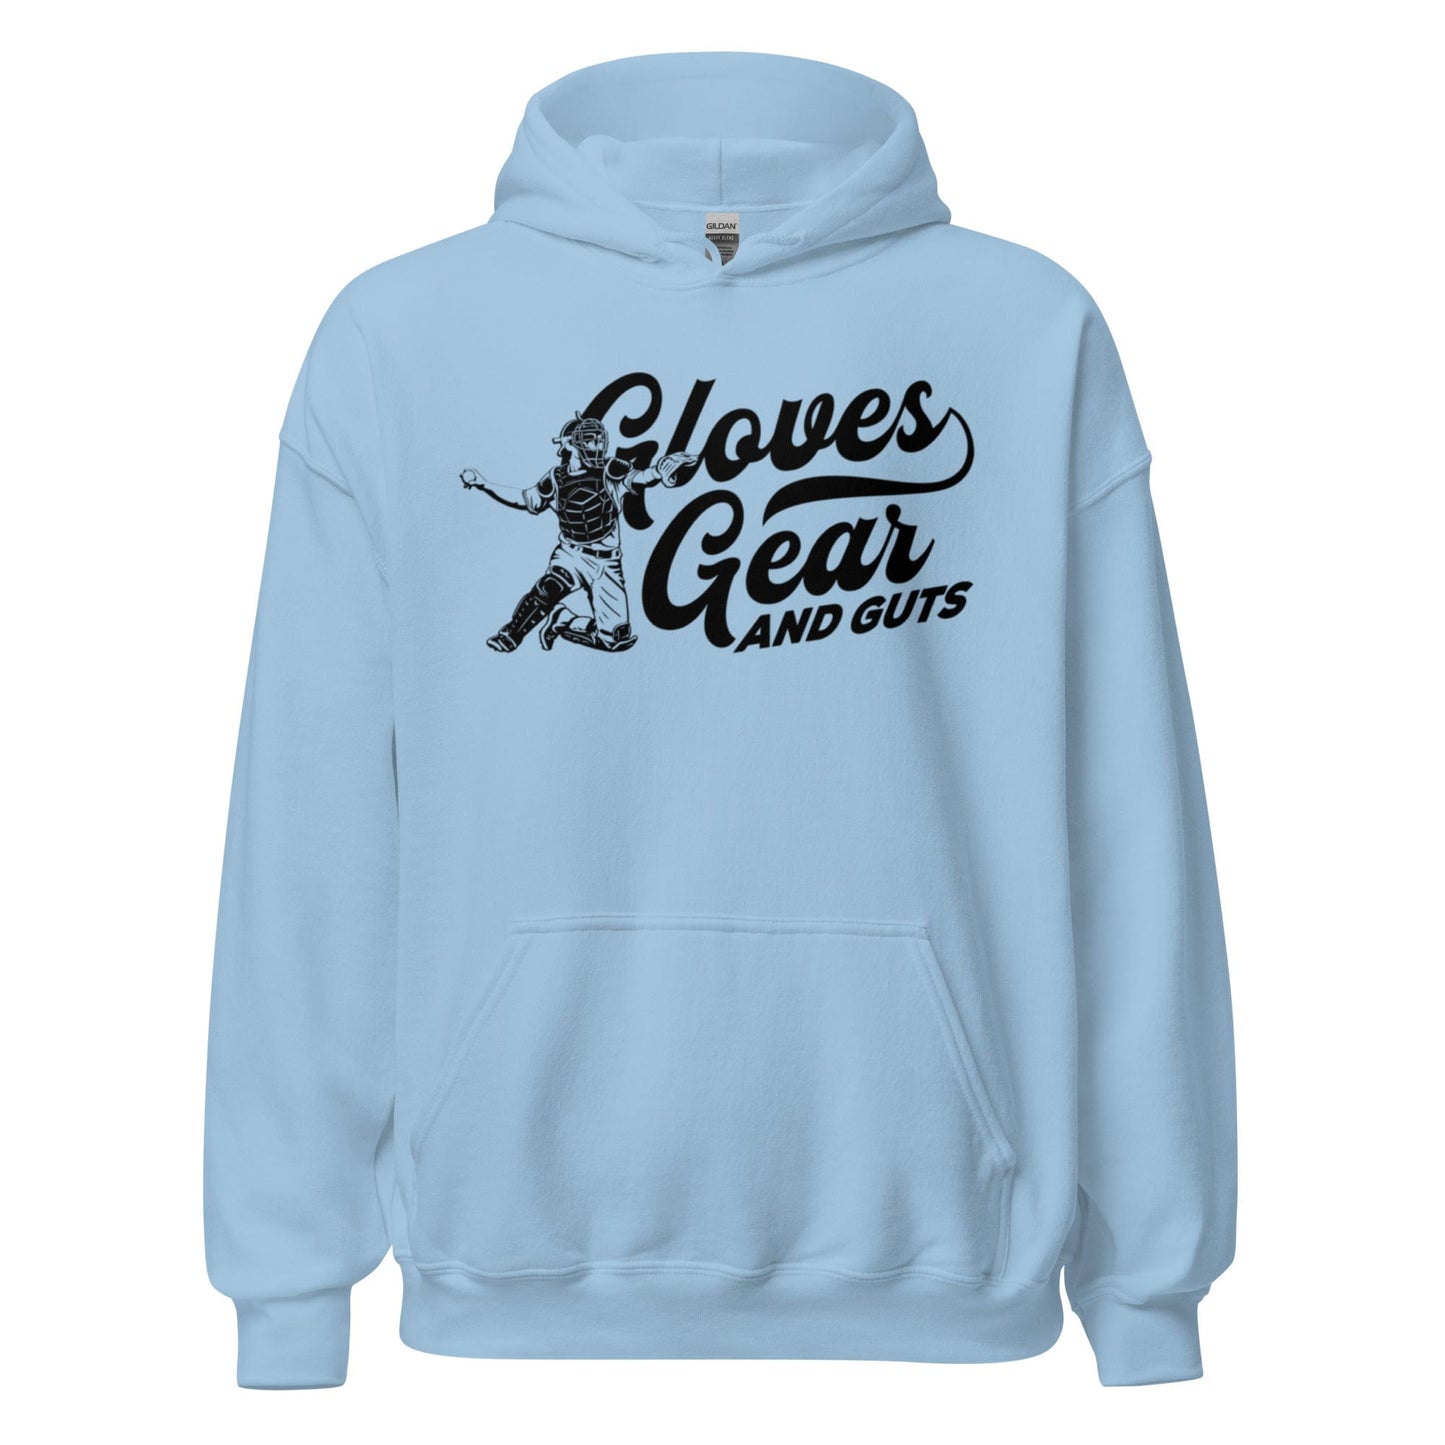 Gloves Gear And Guts - Adult Hoodie